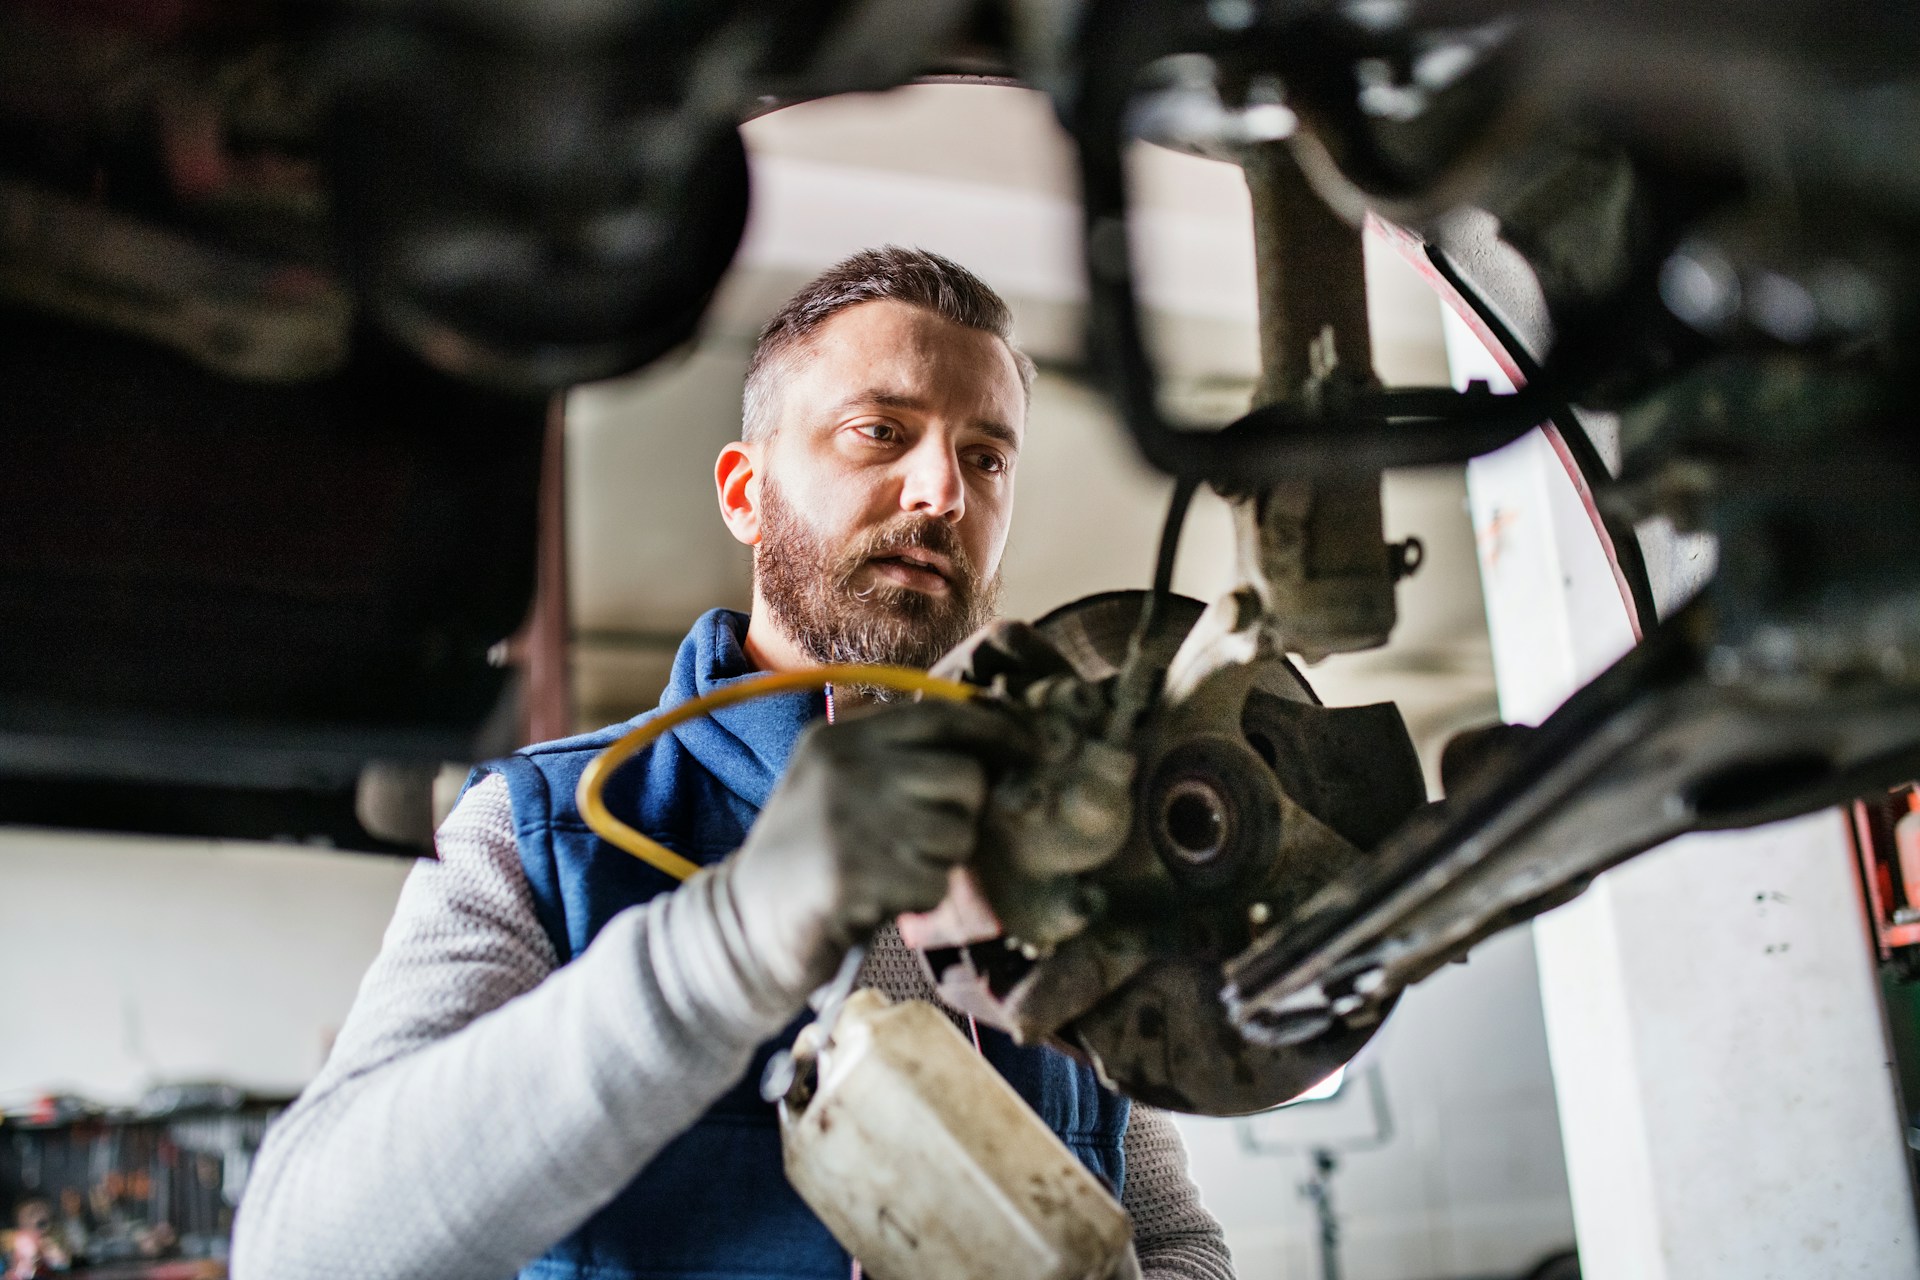 Brake System Maintenance Explained: Importance, Essential Steps and Warning Signs